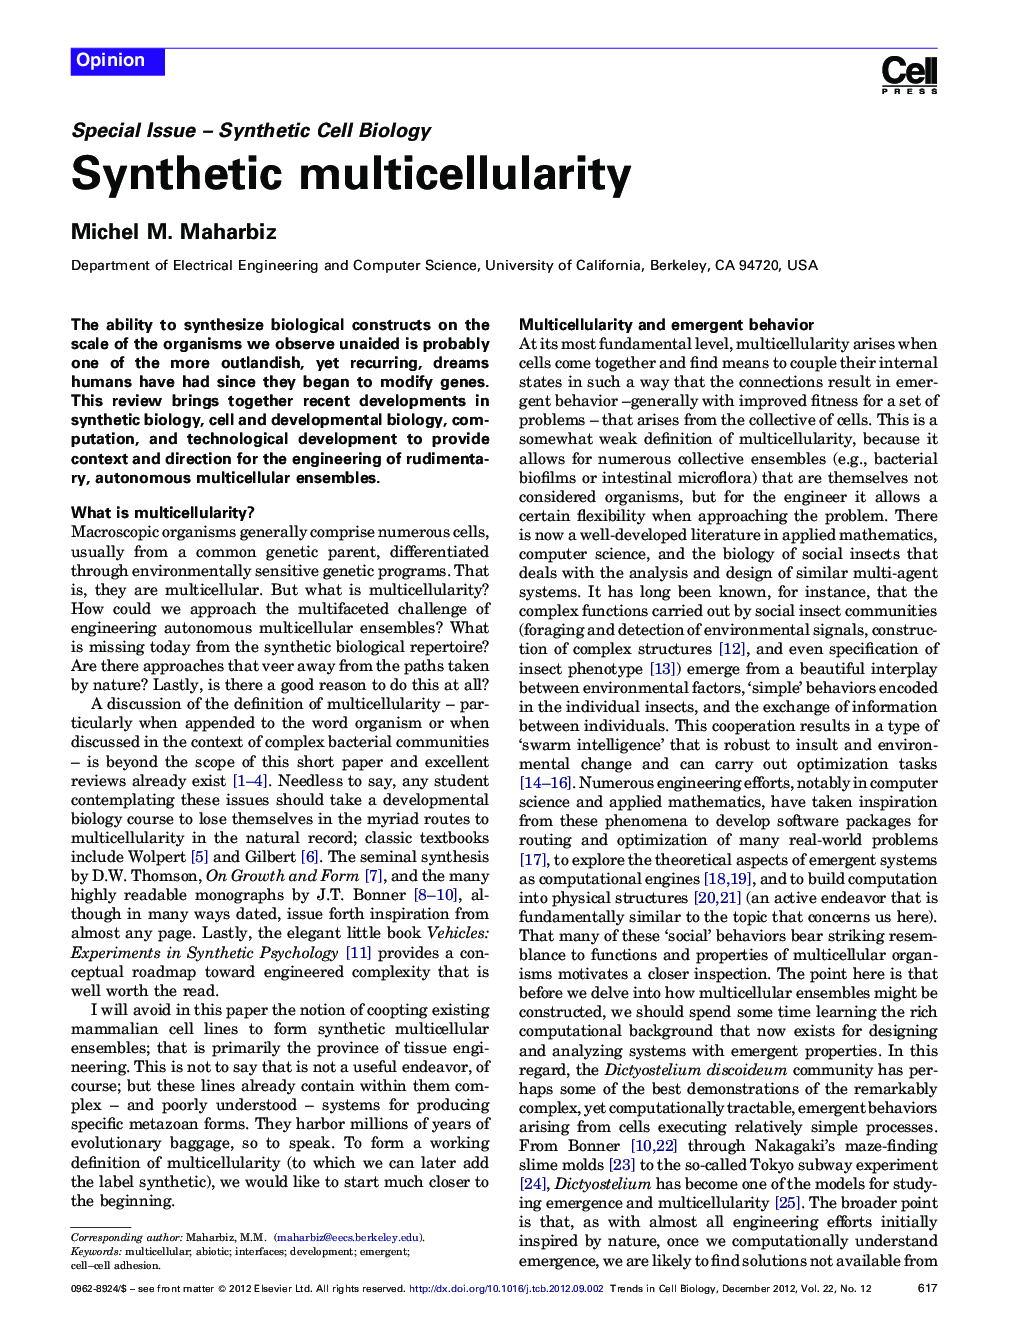 Synthetic multicellularity